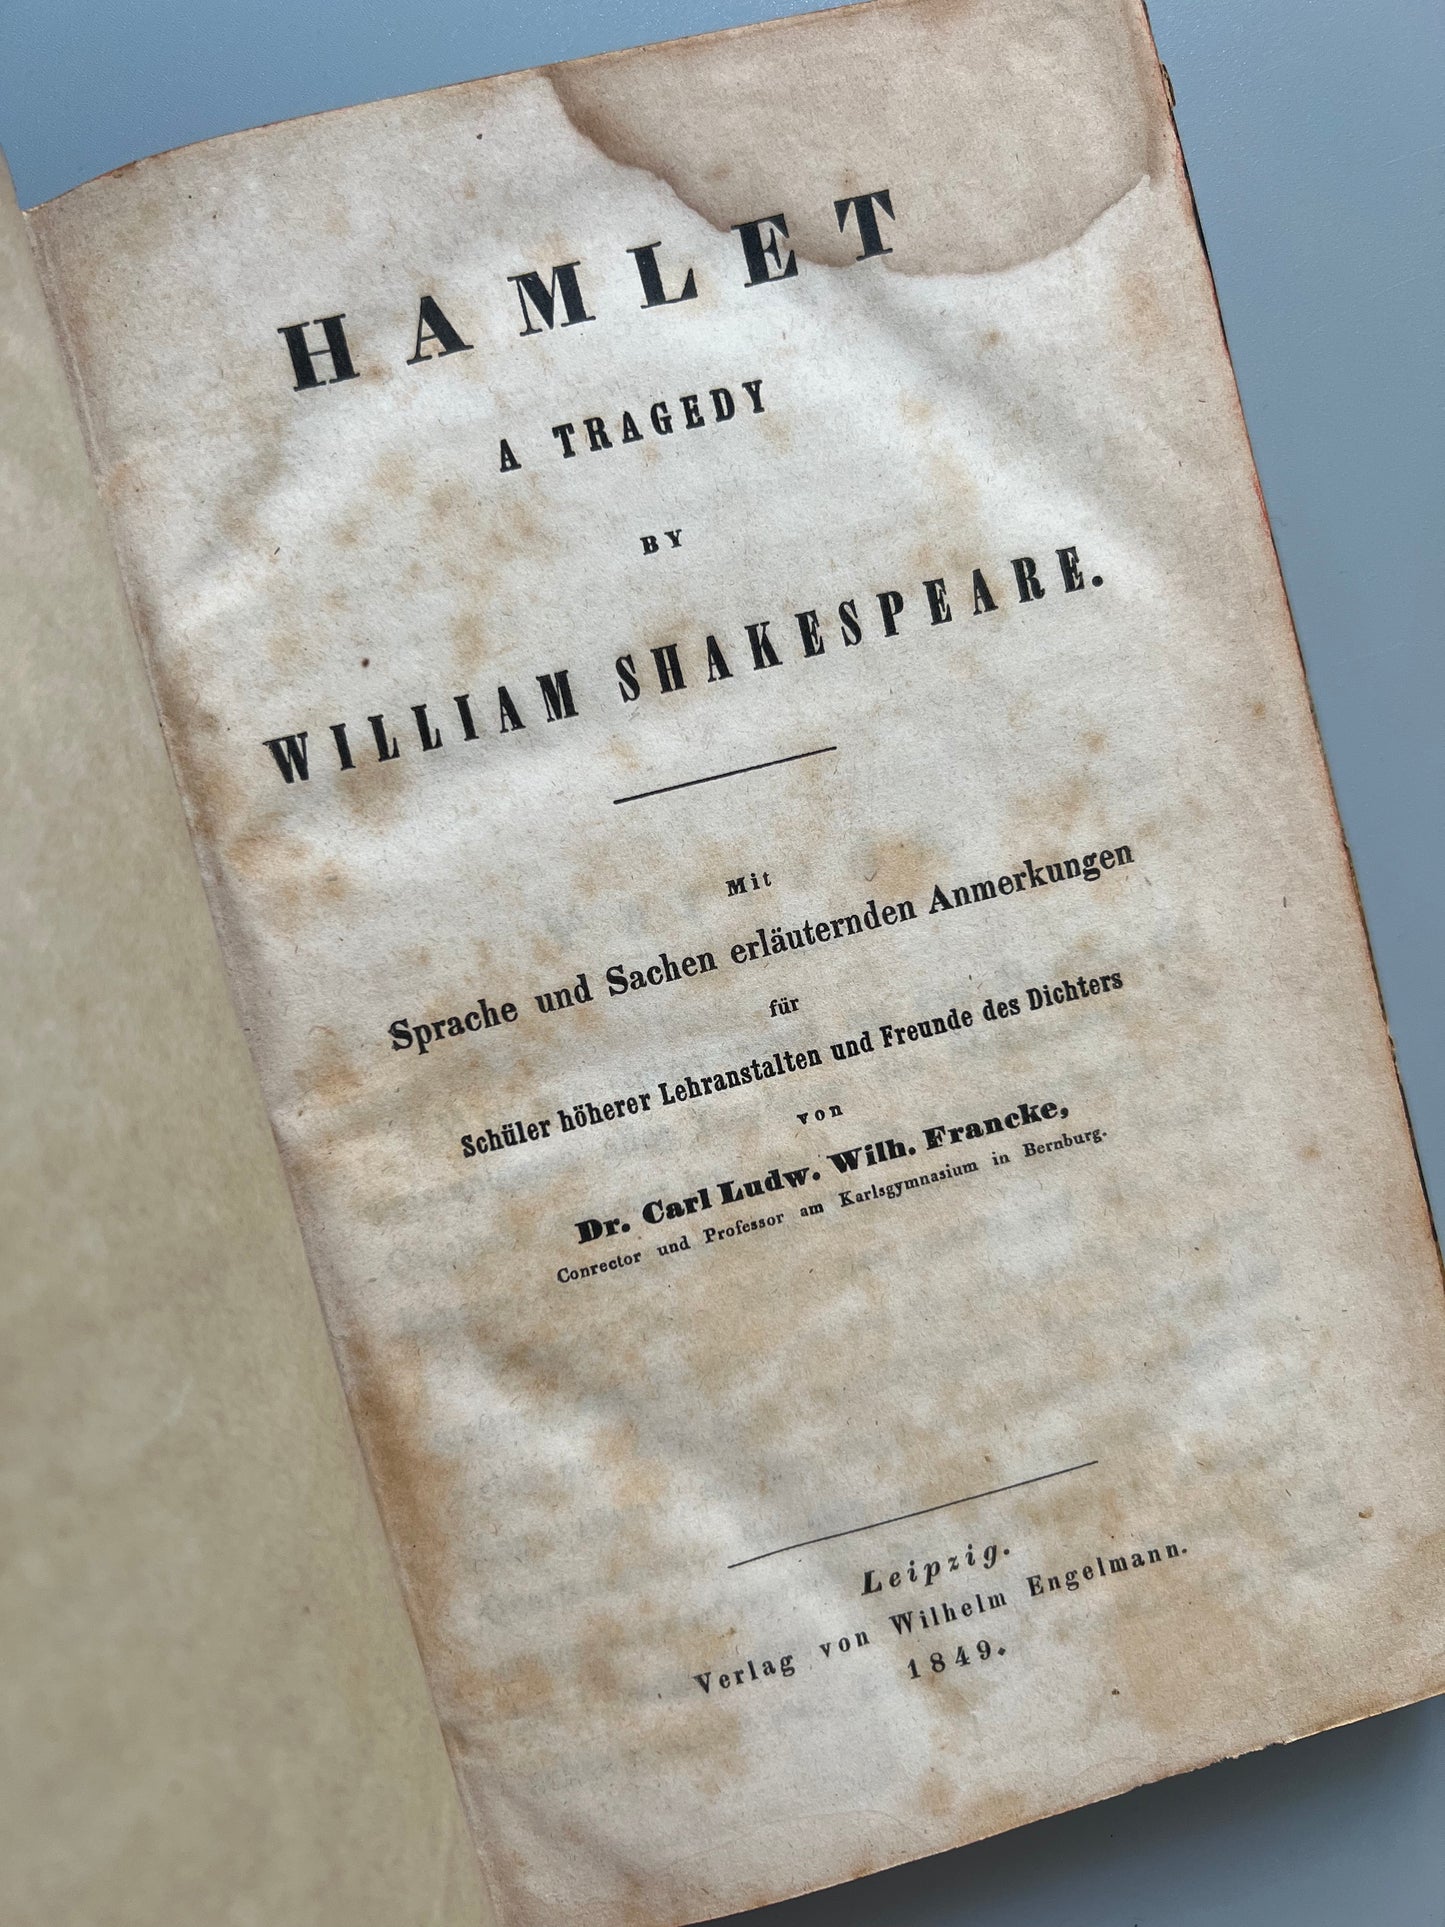 Hamlet, a tragedy by William Shakespeare - Leipzig, 1849